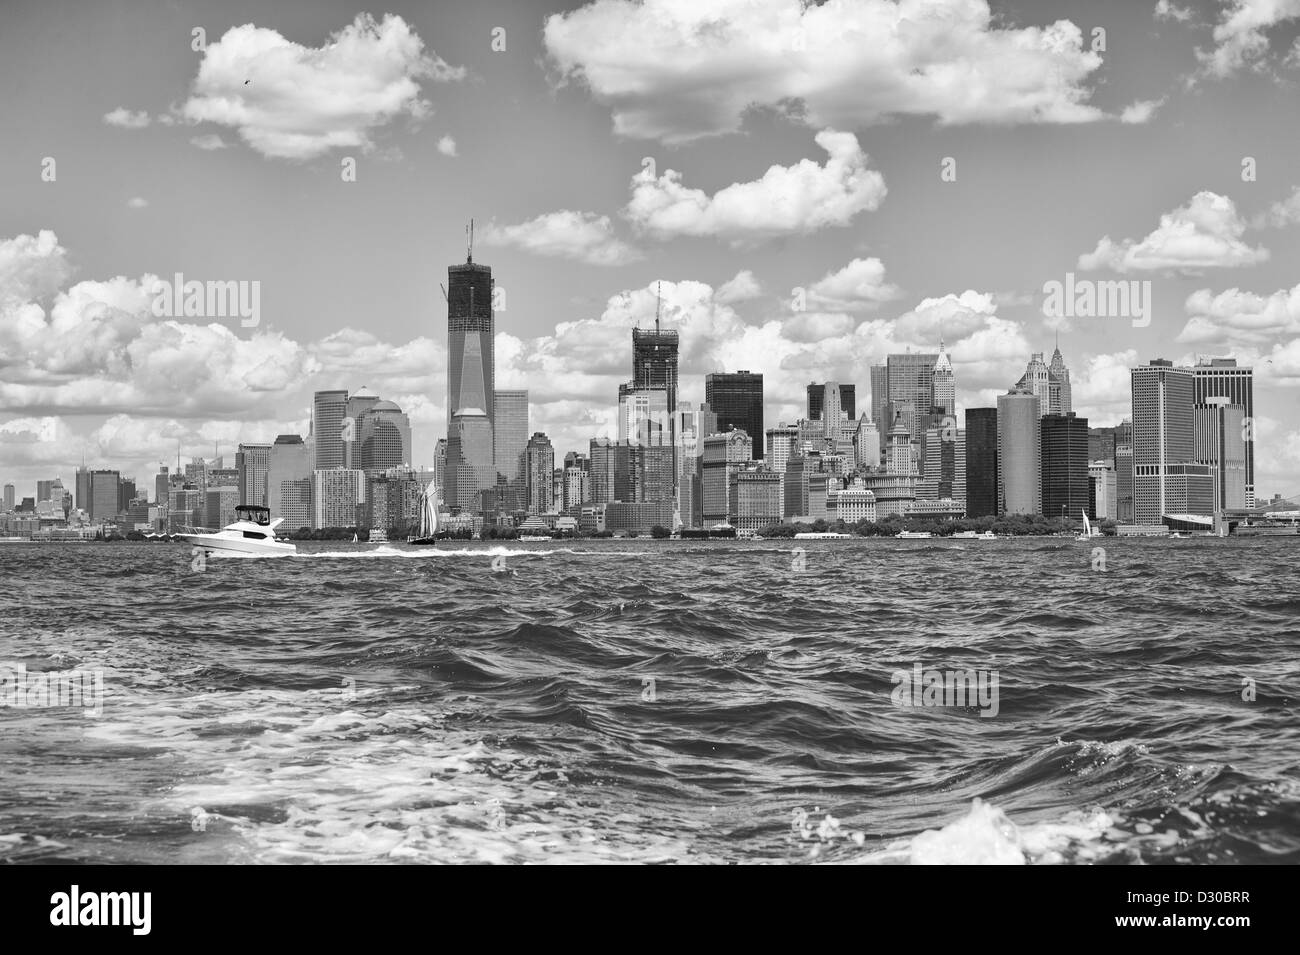 New York City skyline and river in Black and White Stock Photo